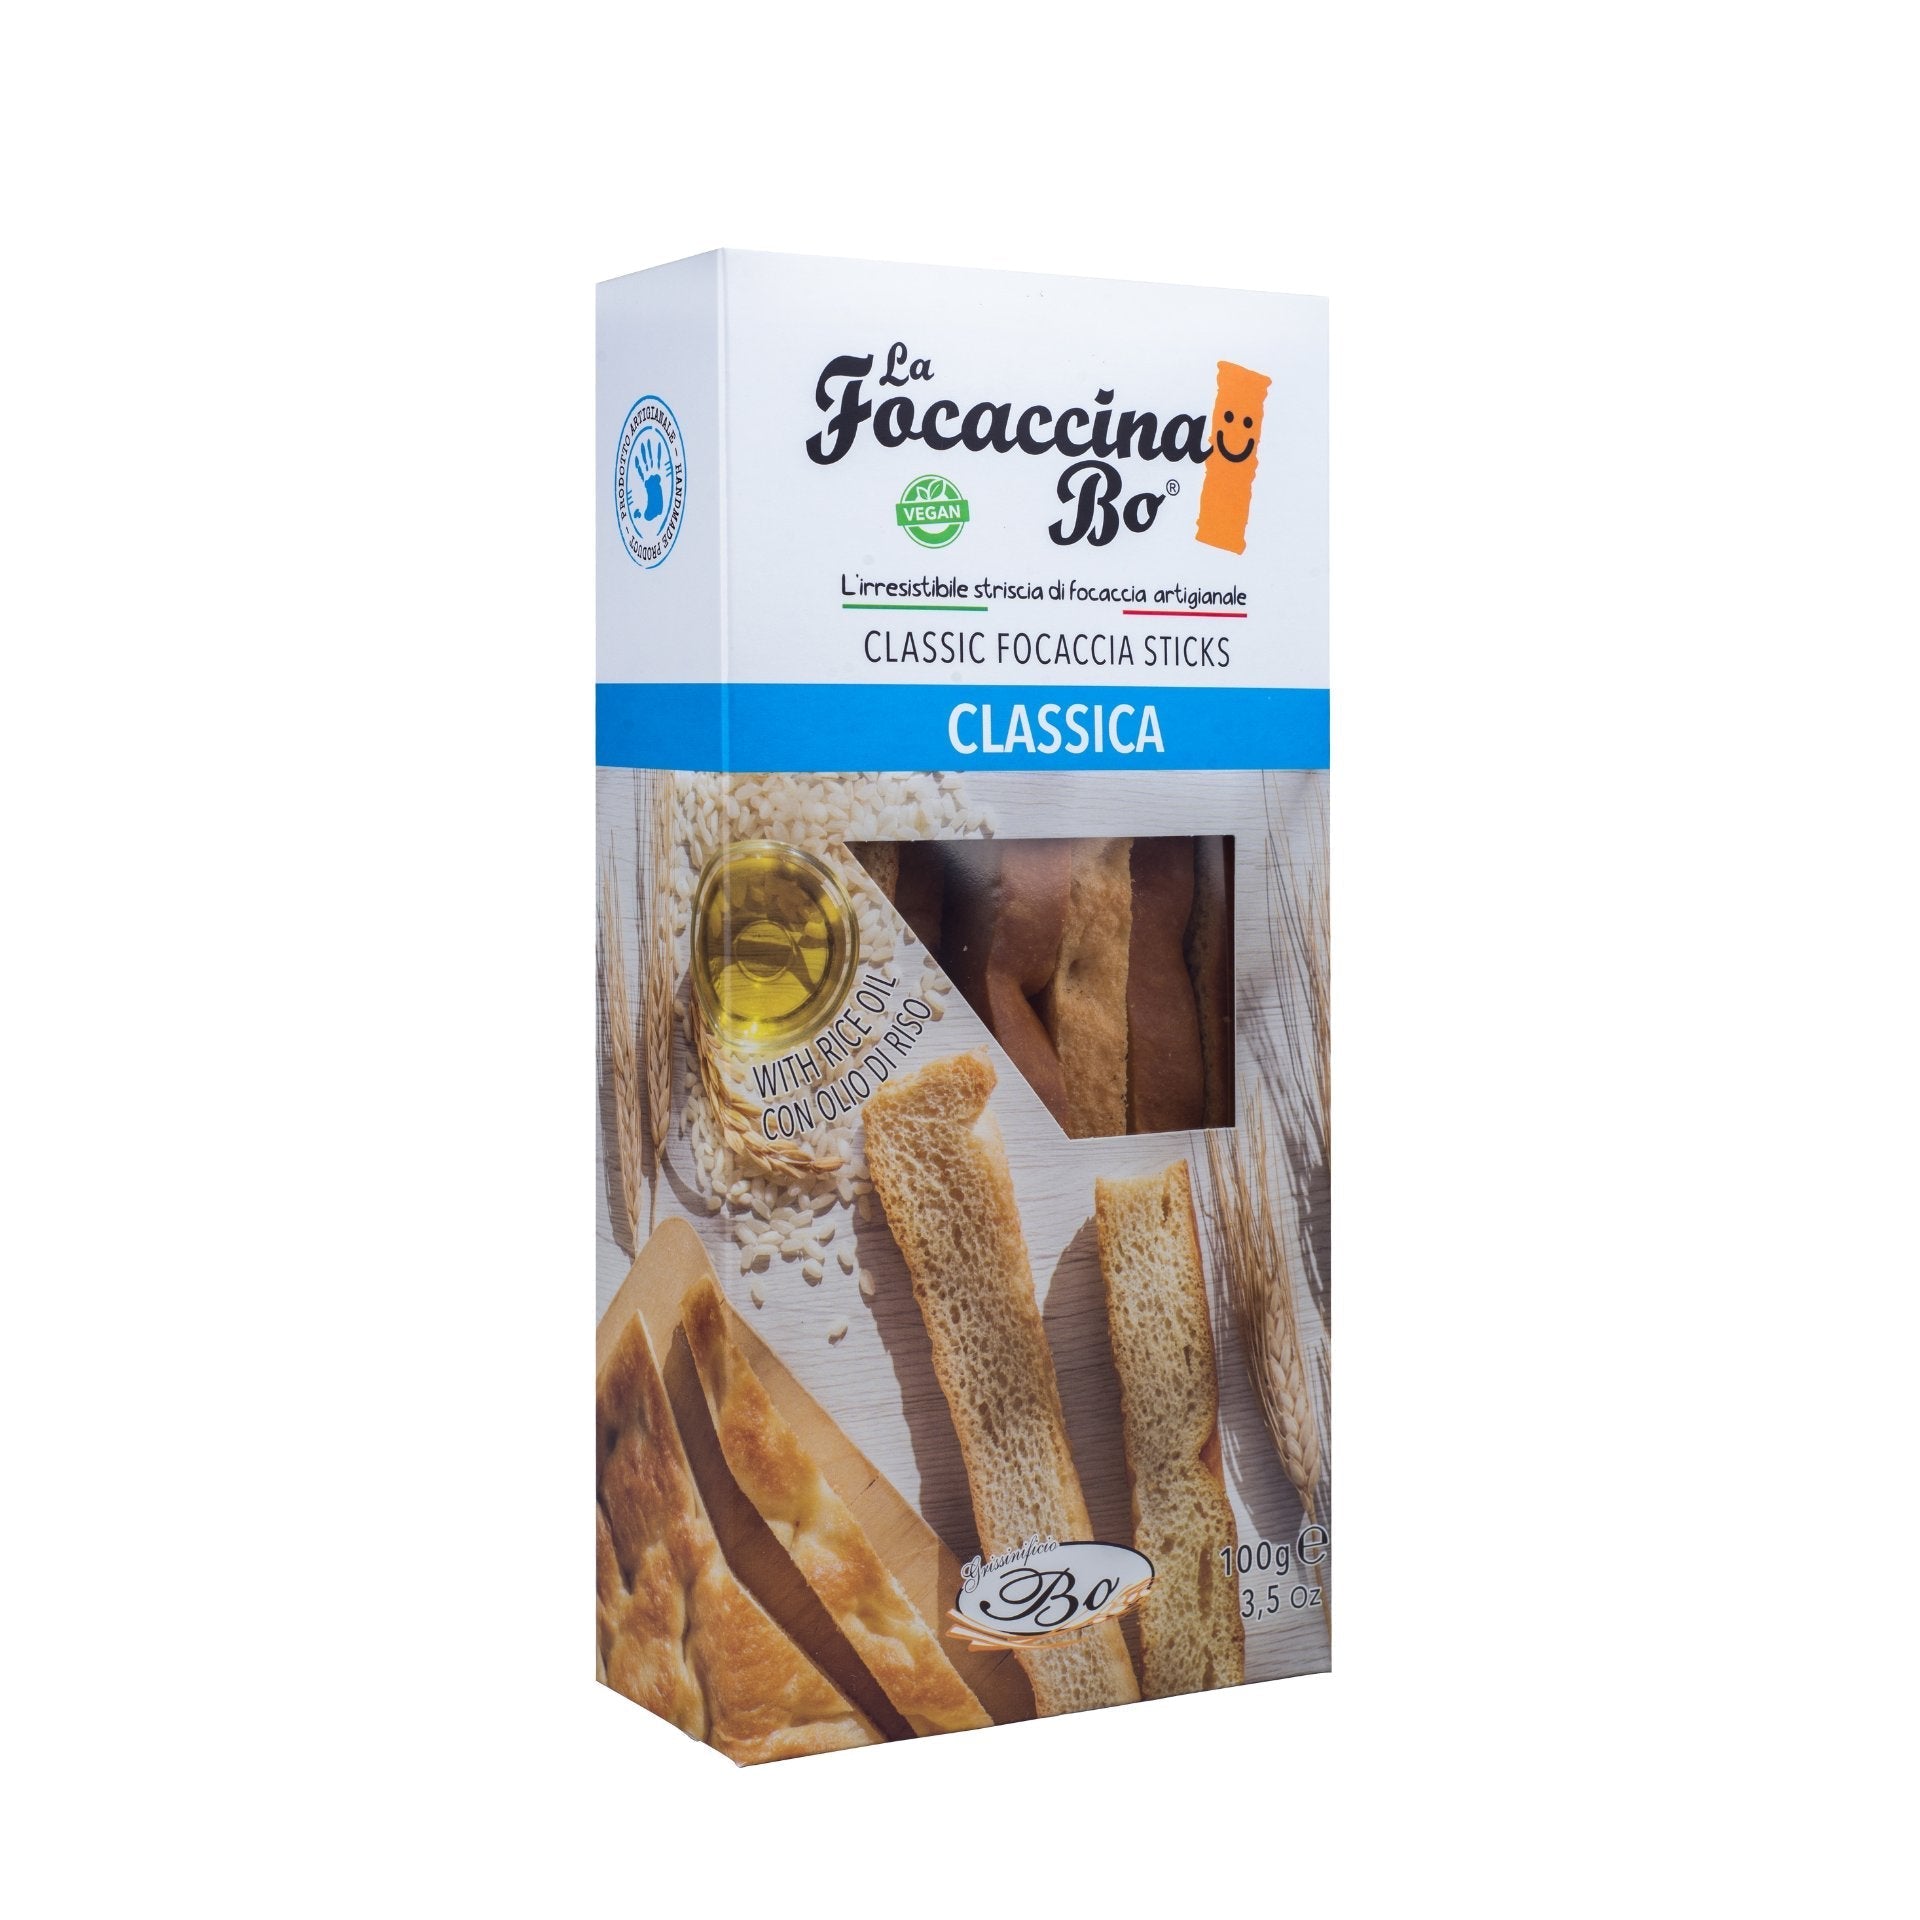 Grissinificio Bo Classic Focaccina (boxed) 100g  | Imported and distributed in the UK by Just Gourmet Foods